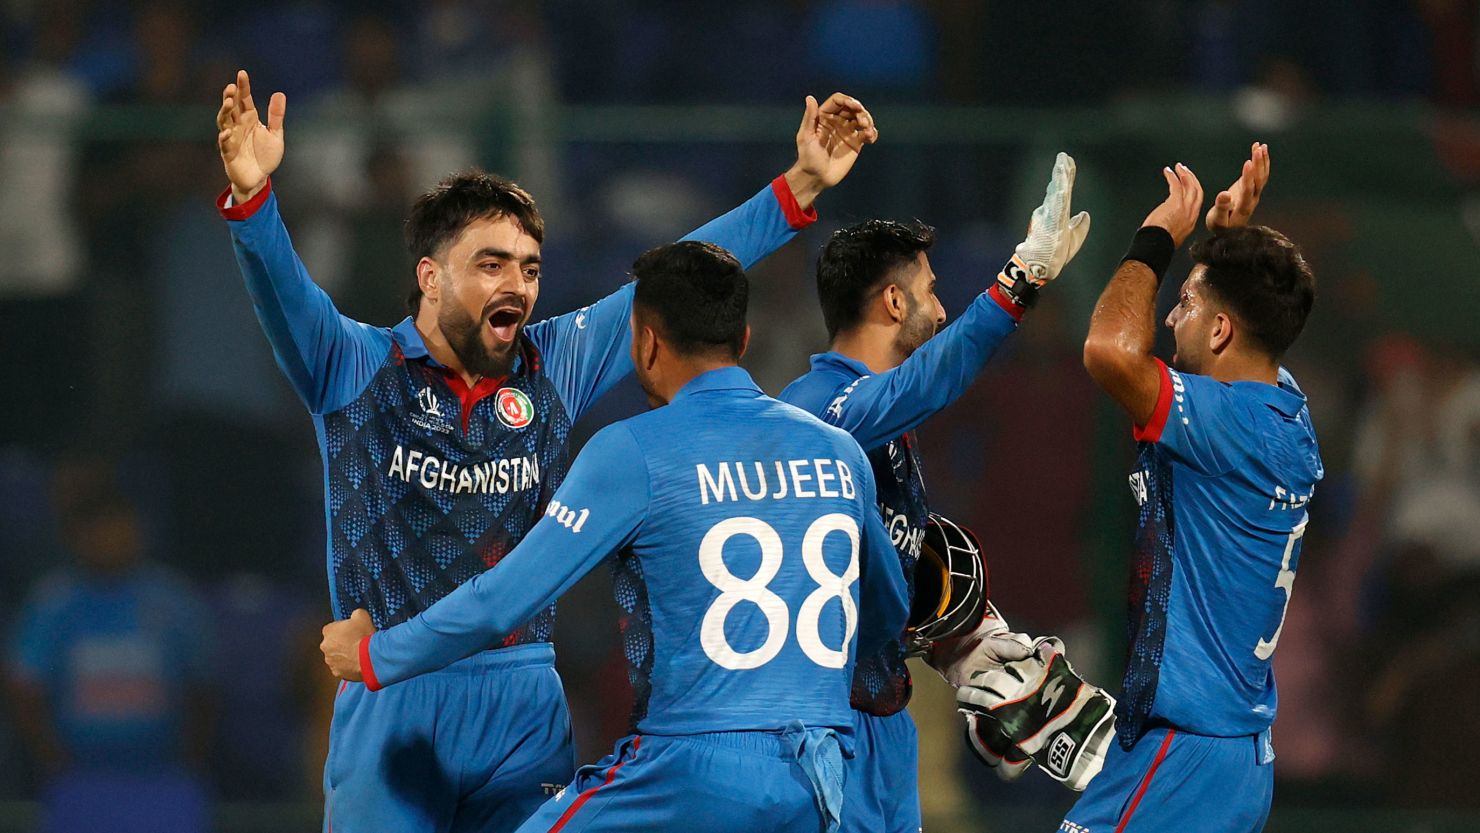 Icc Cricket World Cup Afghanistan Stuns England In One Of The Biggest Ever Sporting Upsets Cnn